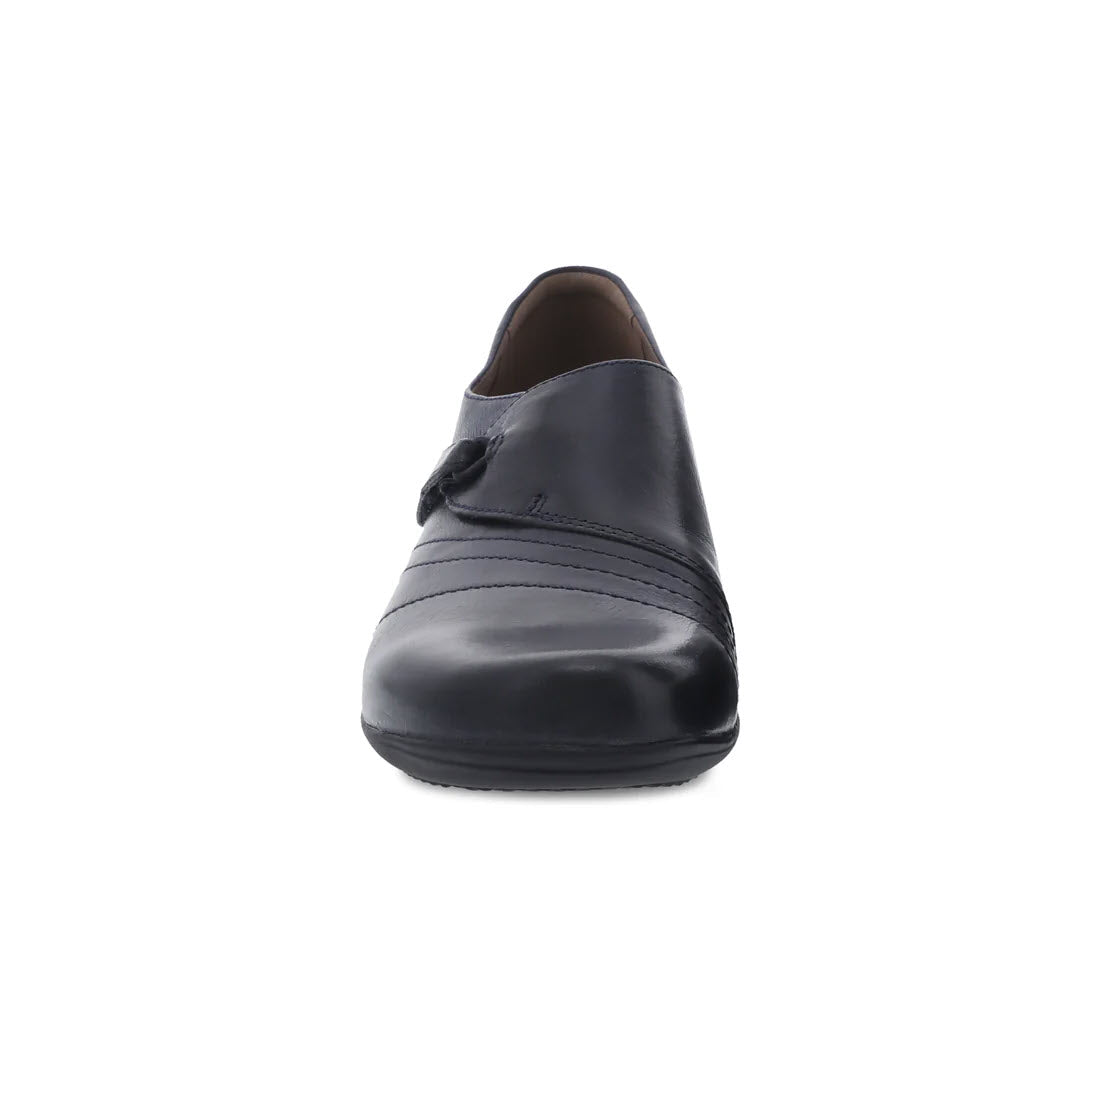 A single Navy Burnished leather shoe with arch support and a tassel on the front, viewed from the front on a white background.